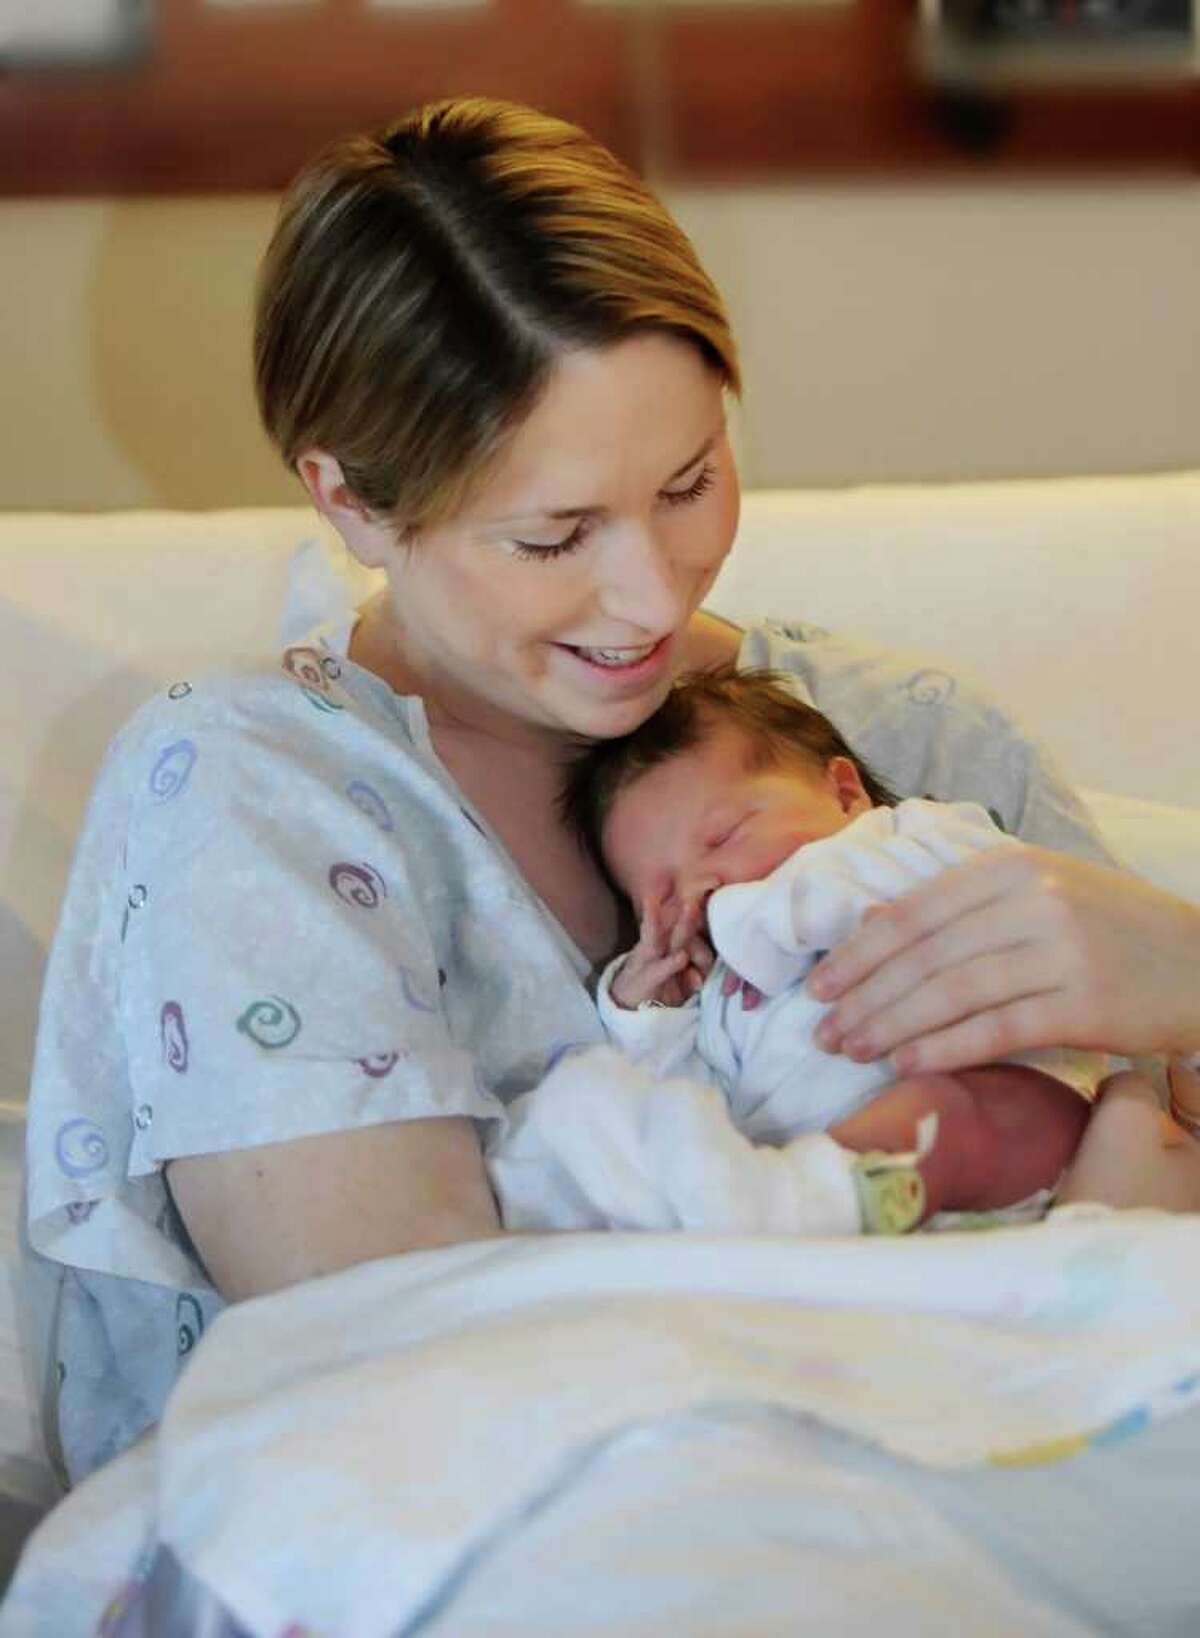 The first baby of the year, Carolyn Vanderbilt, was born at 12:02 a.m. to Roxanne and Hugh Vanderbilt, of Greenwich Monday, Jan. 1, 2012. The baby was weight was 9 pounds, 1 ounce.